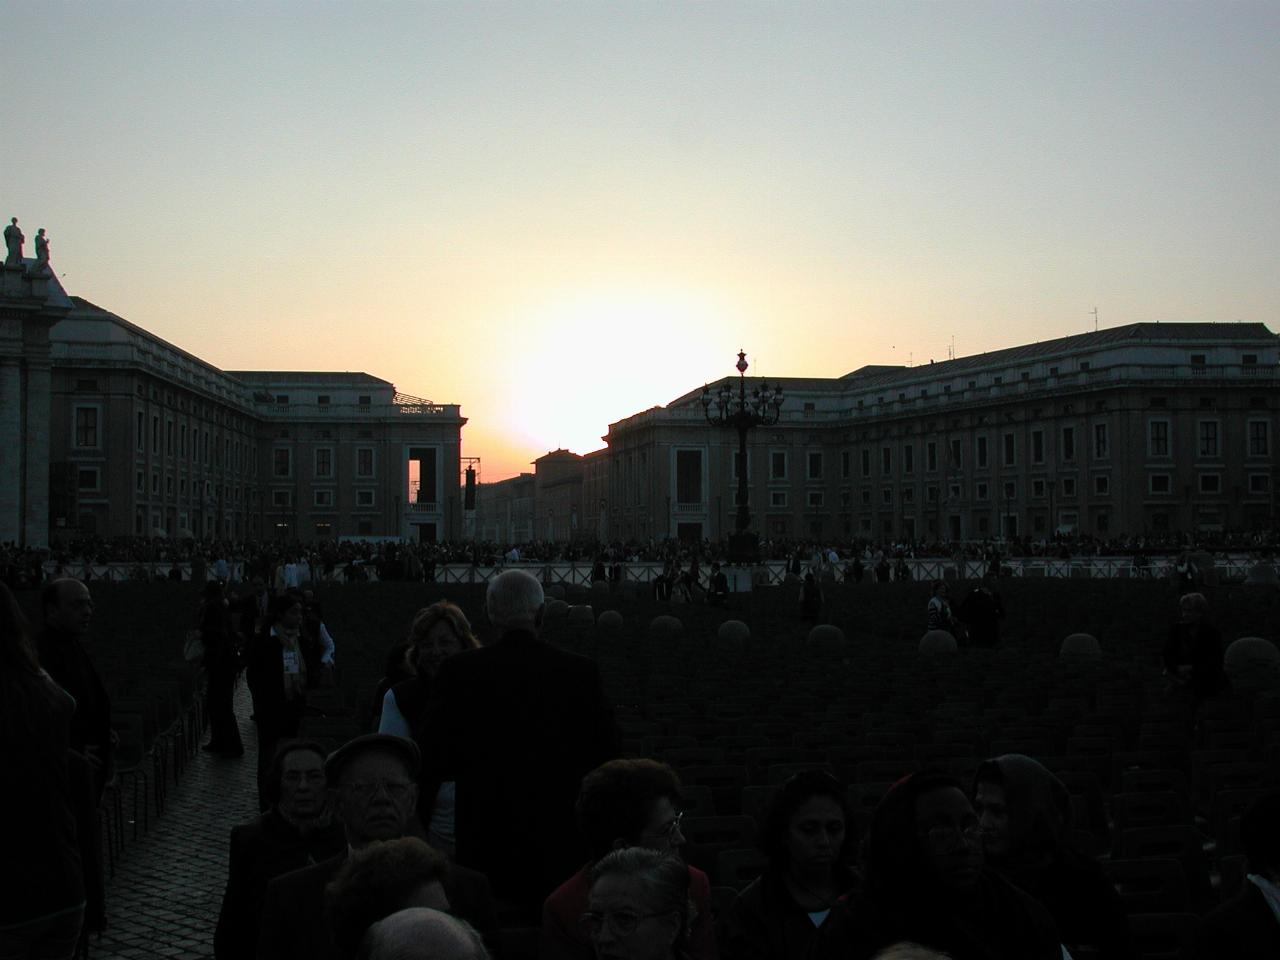 Early morning in St. Peter's Piazza